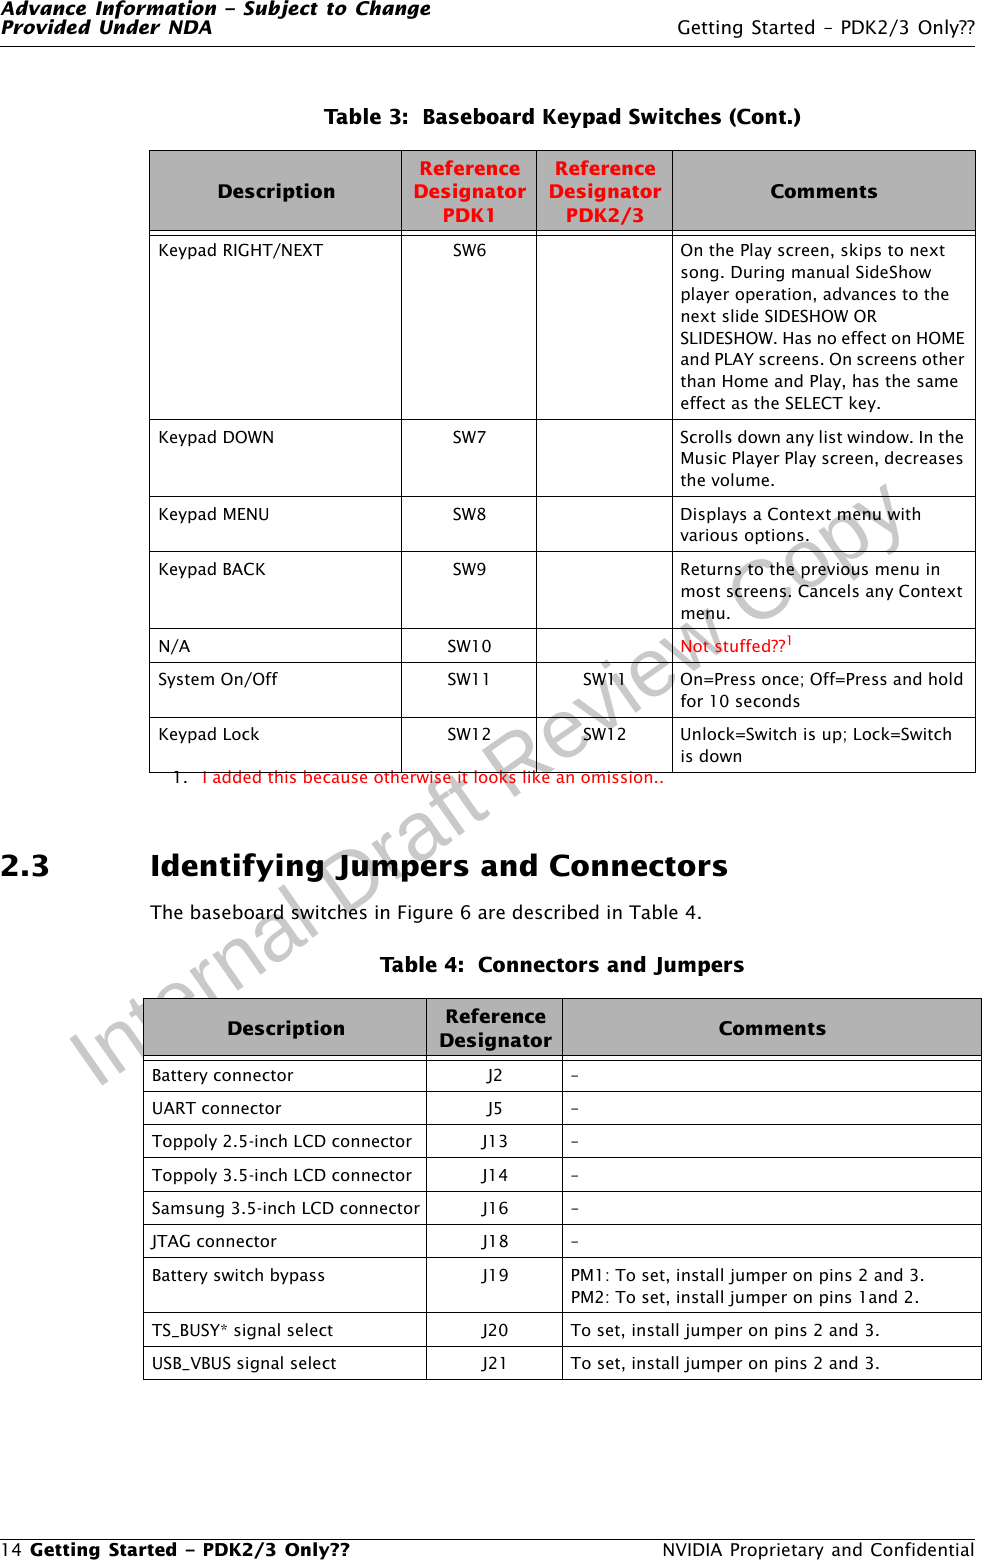 Advance Information – Subject to ChangeProvided Under NDA Getting Started – PDK2/3 Only??14 Getting Started – PDK2/3 Only??  NVIDIA Proprietary and ConfidentialInternal Draft Review Copy2.3 Identifying Jumpers and ConnectorsThe baseboard switches in Figure 6 are described in Table 4. Keypad RIGHT/NEXT SW6 On the Play screen, skips to next song. During manual SideShow player operation, advances to the next slide SIDESHOW OR SLIDESHOW. Has no effect on HOME and PLAY screens. On screens other than Home and Play, has the same effect as the SELECT key.Keypad DOWN SW7 Scrolls down any list window. In the Music Player Play screen, decreases the volume.Keypad MENU SW8 Displays a Context menu with various options.Keypad BACK SW9 Returns to the previous menu in most screens. Cancels any Context menu.N/A SW10 Not stuffed??1System On/Off SW11 SW11 On=Press once; Off=Press and hold for 10 secondsKeypad Lock SW12 SW12 Unlock=Switch is up; Lock=Switch is down1. I added this because otherwise it looks like an omission..Table 4:  Connectors and JumpersDescription ReferenceDesignator CommentsBattery connector J2 –UART connector J5 –Toppoly 2.5-inch LCD connector J13 –Toppoly 3.5-inch LCD connector J14 –Samsung 3.5-inch LCD connector J16 –JTAG connector J18 –Battery switch bypass J19 PM1: To set, install jumper on pins 2 and 3.PM2: To set, install jumper on pins 1and 2.TS_BUSY* signal select J20 To set, install jumper on pins 2 and 3.USB_VBUS signal select J21 To set, install jumper on pins 2 and 3.Table 3:  Baseboard Keypad Switches (Cont.)DescriptionReferenceDesignatorPDK1ReferenceDesignatorPDK2/3Comments